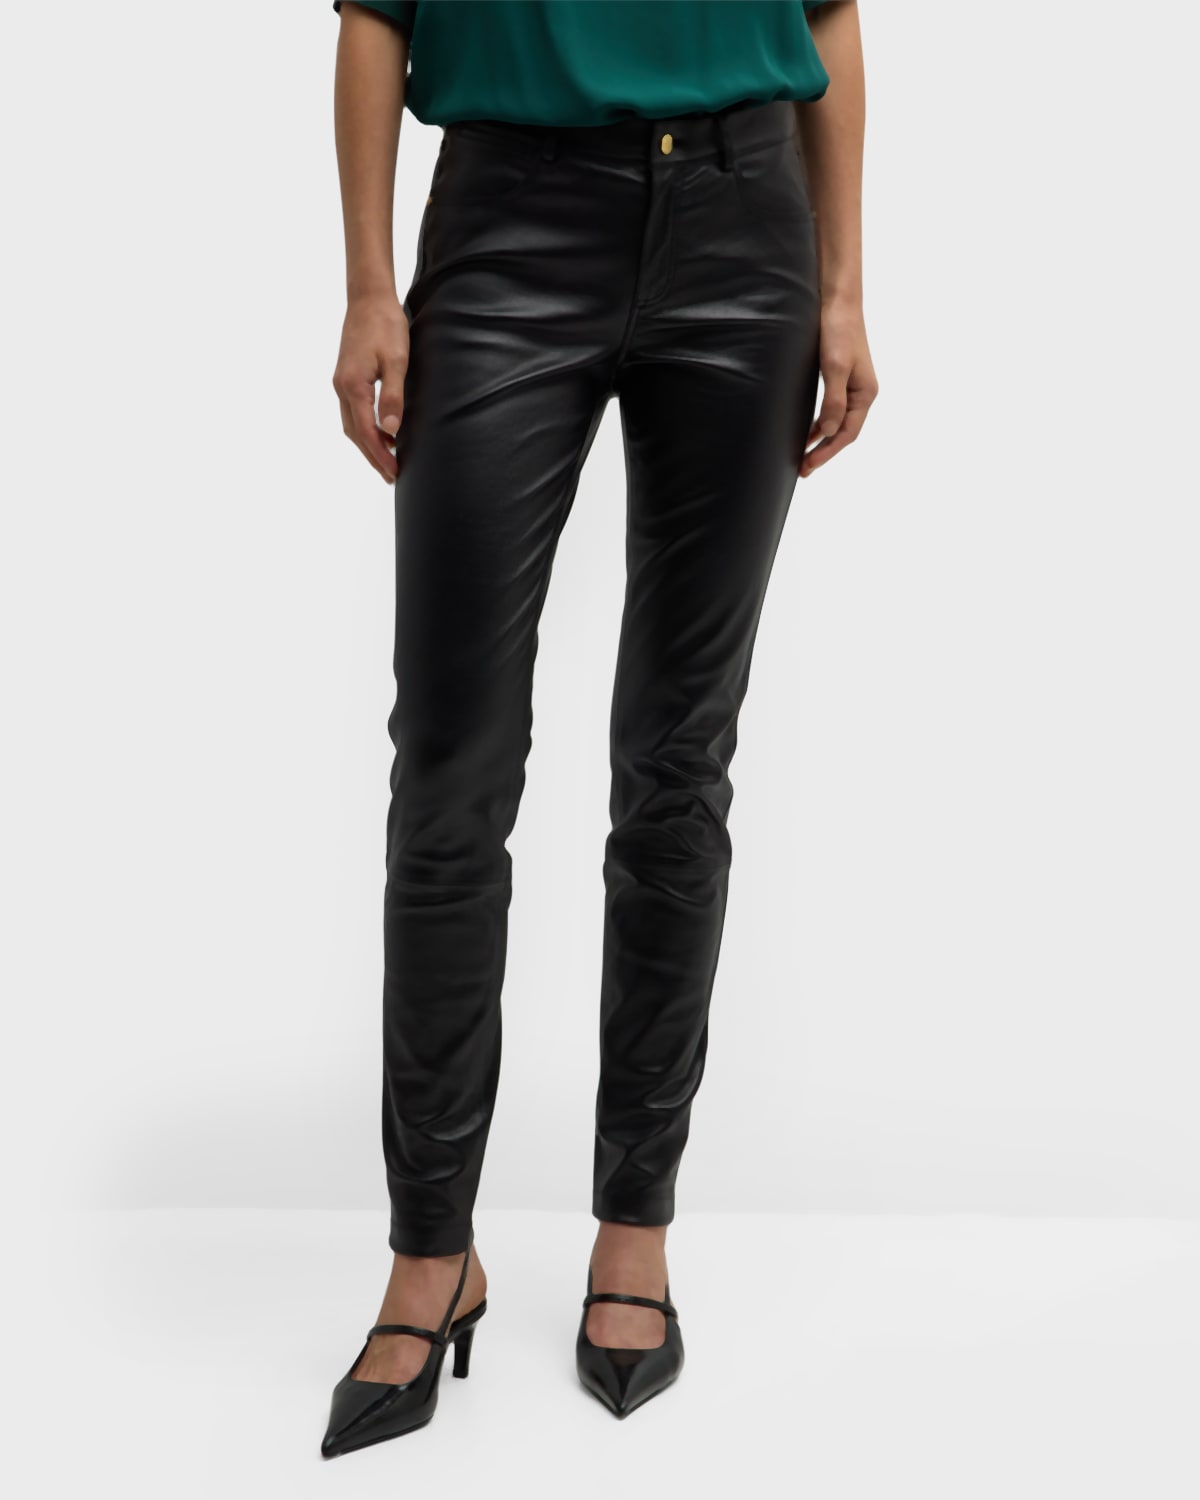 Mercer Mid-Rise Leather Skinny Jeans